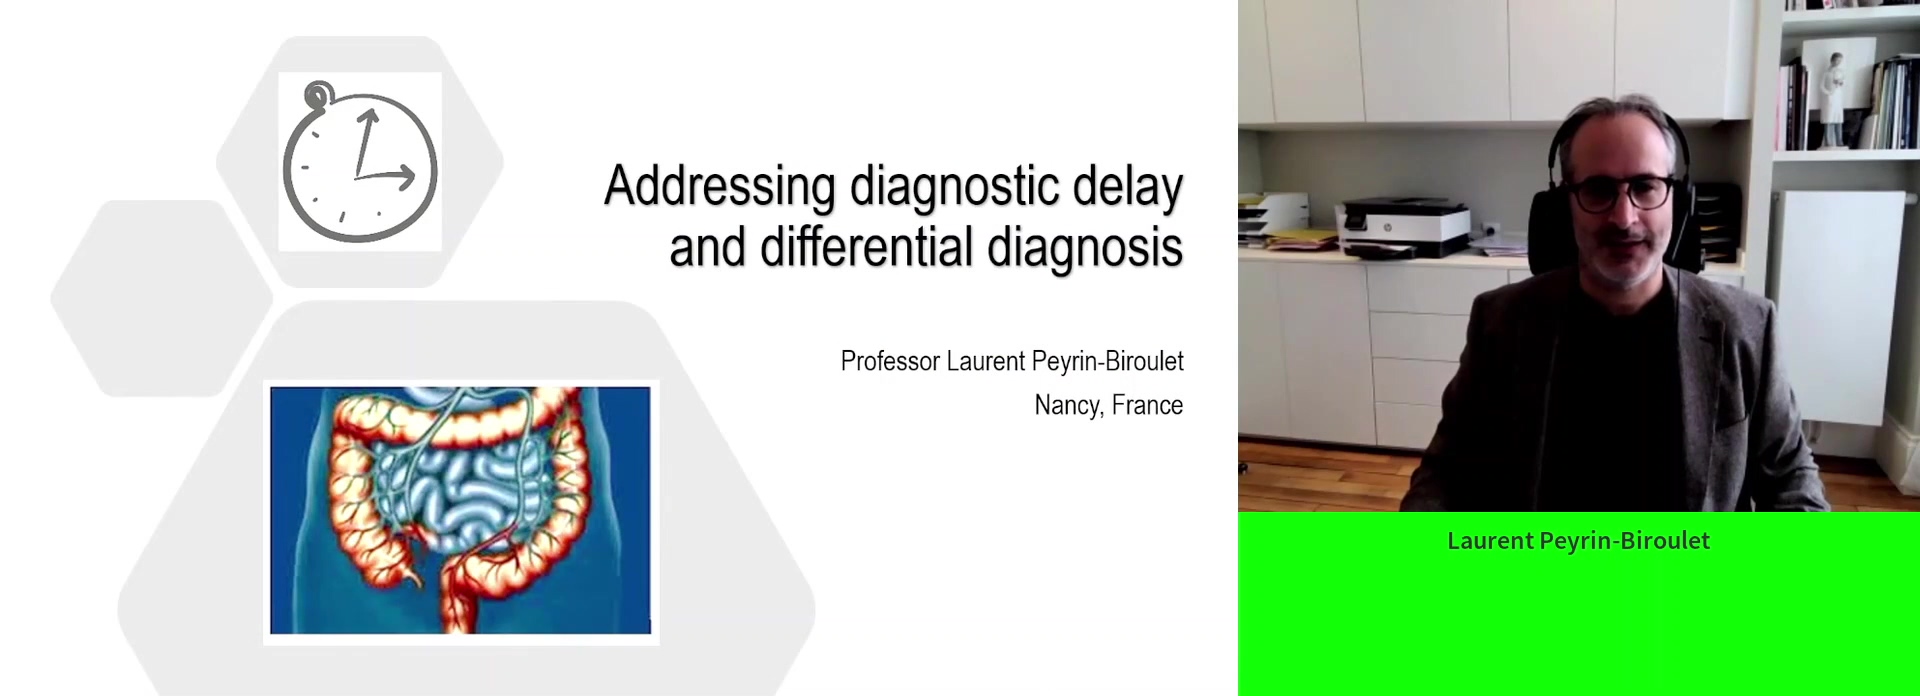 Addressing diagnostic delay and differential diagnosis